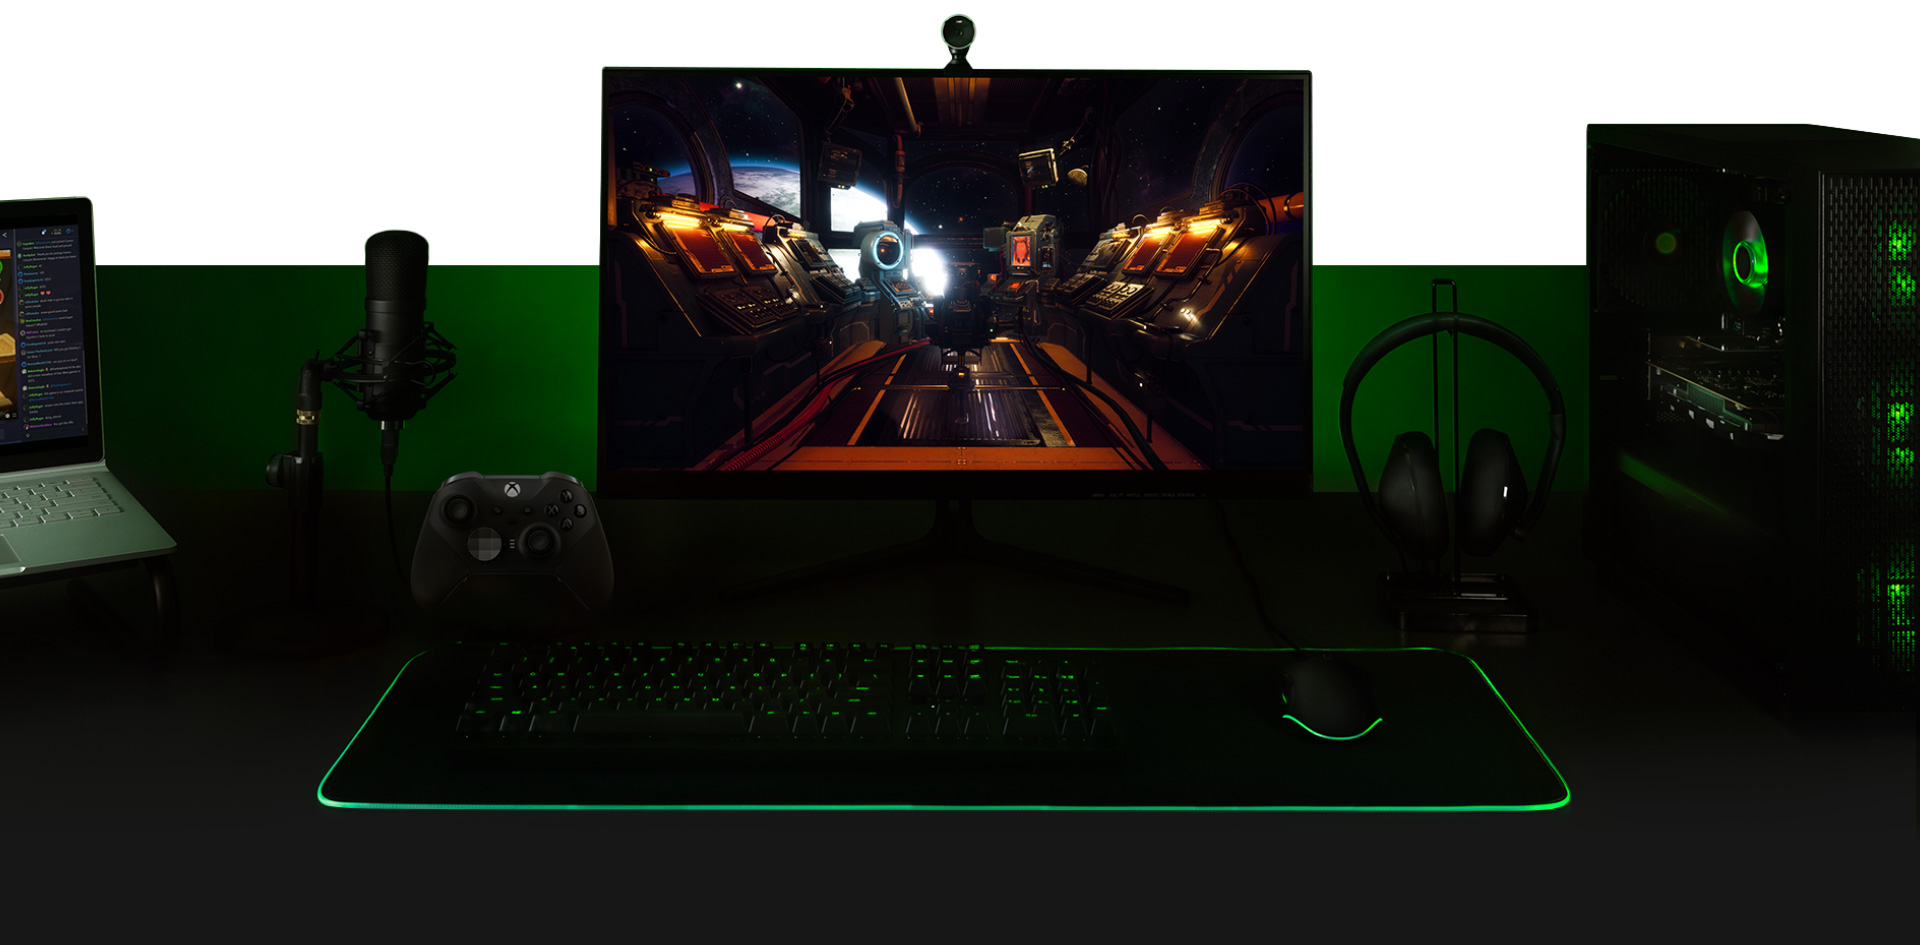 Desktop with a PC, monitor with The Outer Worlds game screen, keyboard, Xbox One controller, microphone, and a laptop all set up together.